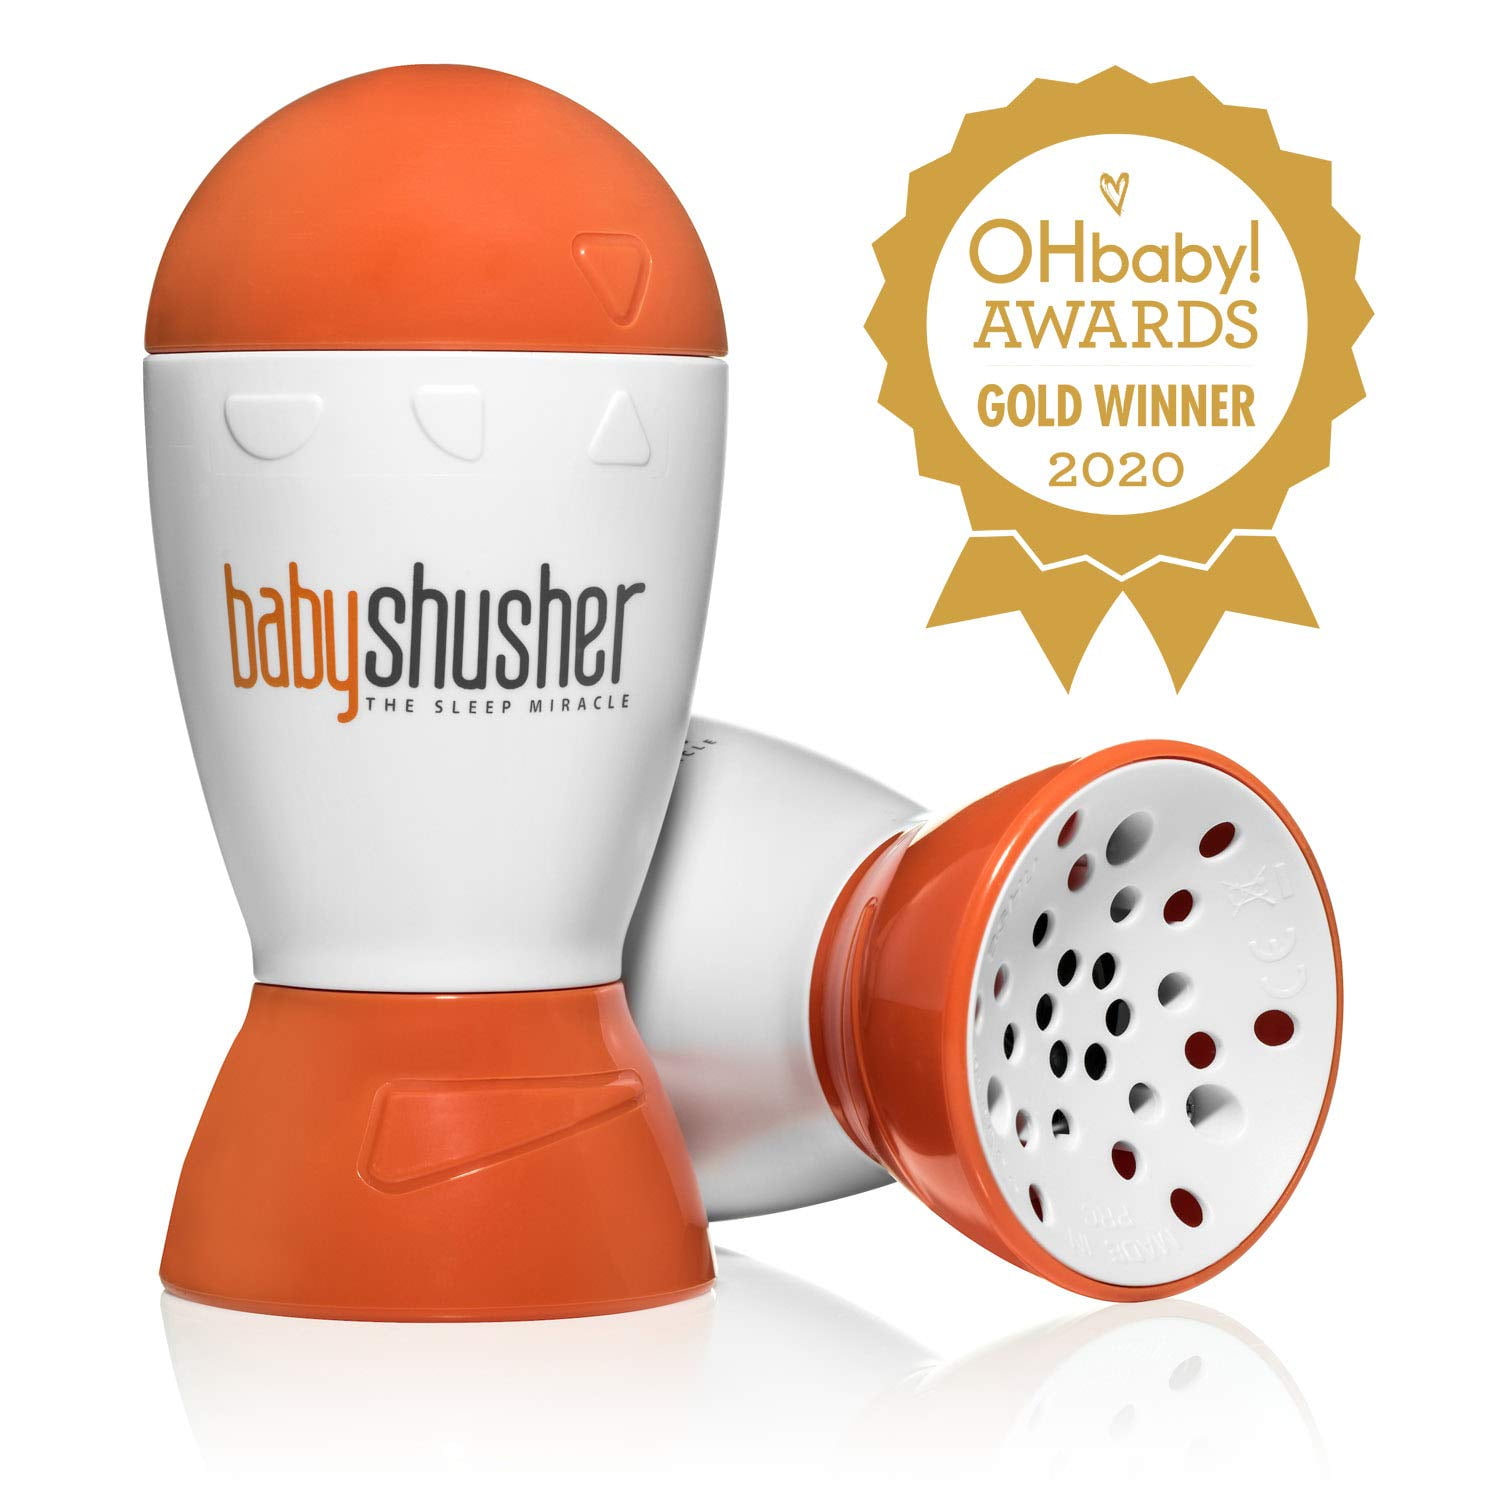 BABY SHUSHER REAL HUMAN VOICE PORTABLE SLEEP SOOTHER SOUND MACHINE (The Sleep Miracle Soother), Awarded